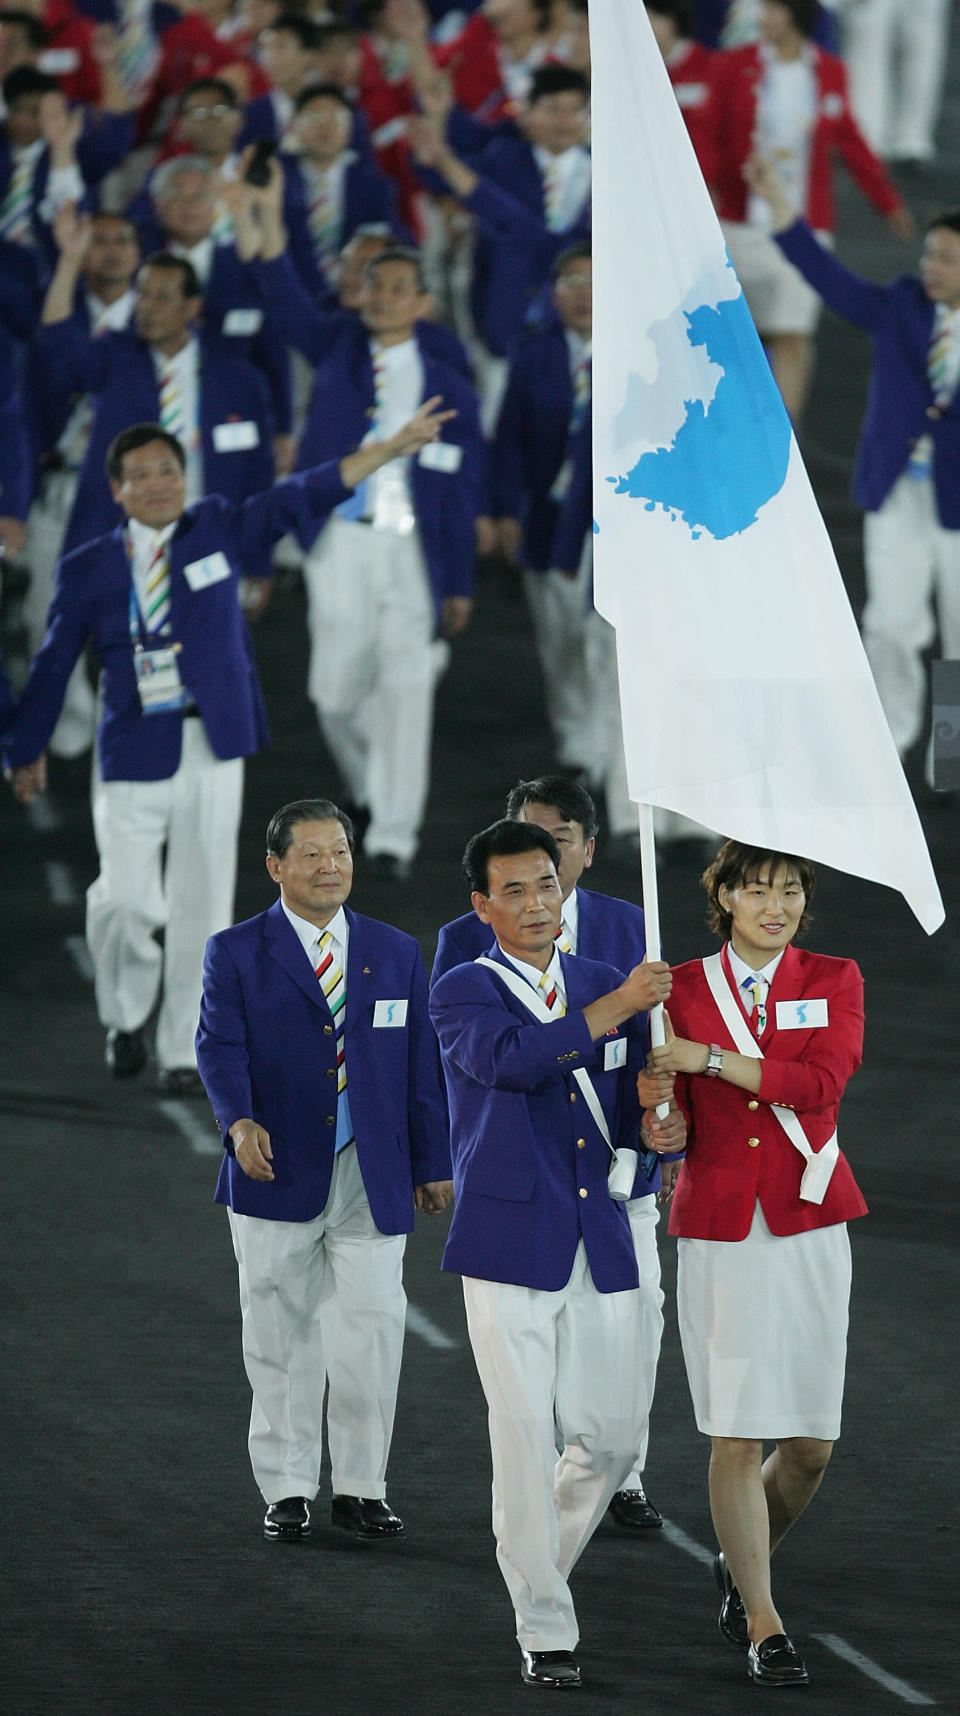 North and South Korean teams marched together under The Unification Flag in the opening ceremonies of the 2000 Summer Olympics in Sydney and the 2004 Summer Olympics in Athens. The flag represents North and South Korea. The background is white and i the centre there is a blue silhouette of the Korean peninsula. The flag has no status as the official flag of either country.